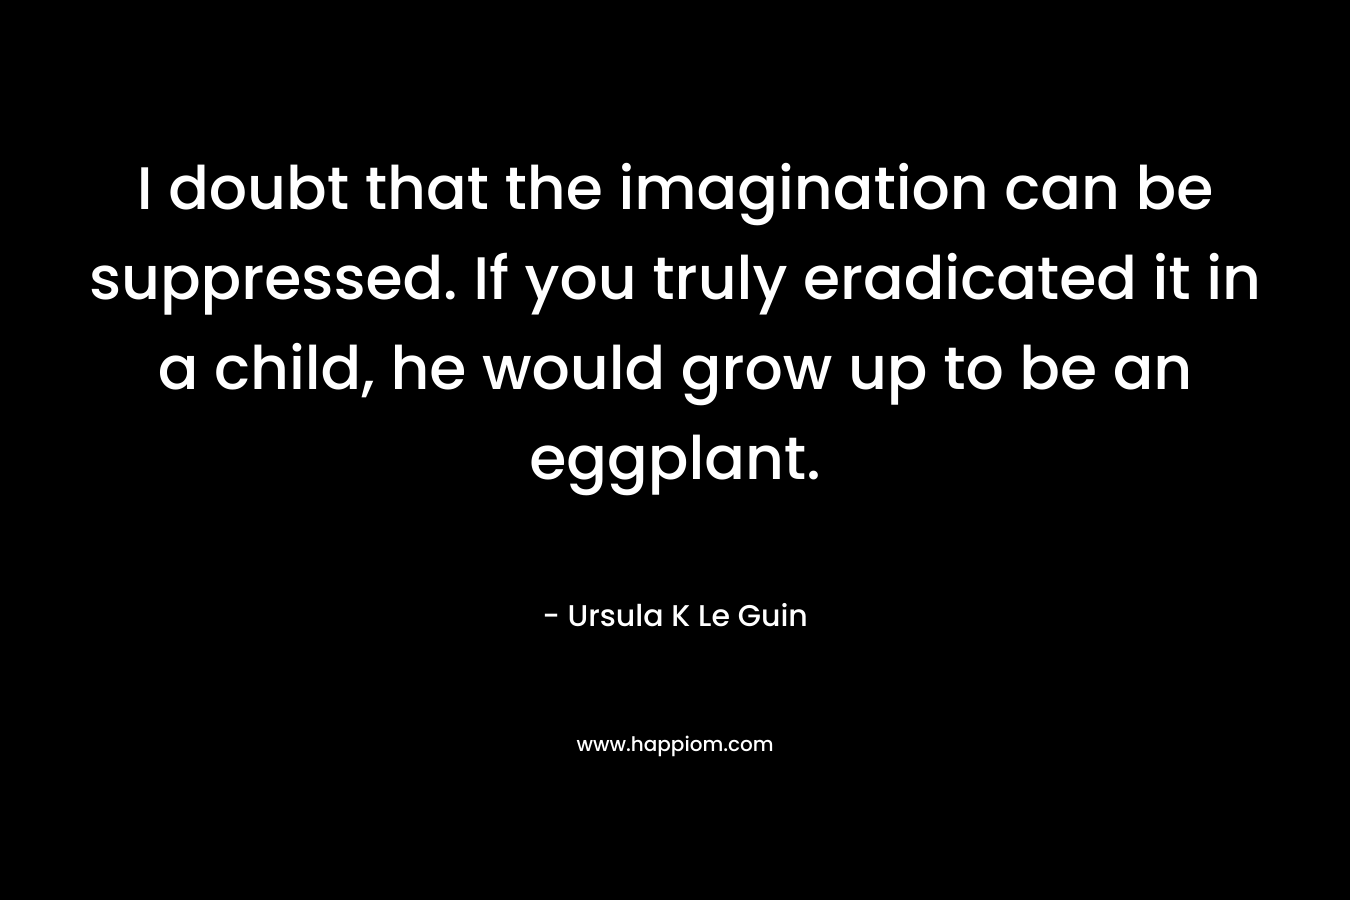 I doubt that the imagination can be suppressed. If you truly eradicated it in a child, he would grow up to be an eggplant. – Ursula K Le Guin